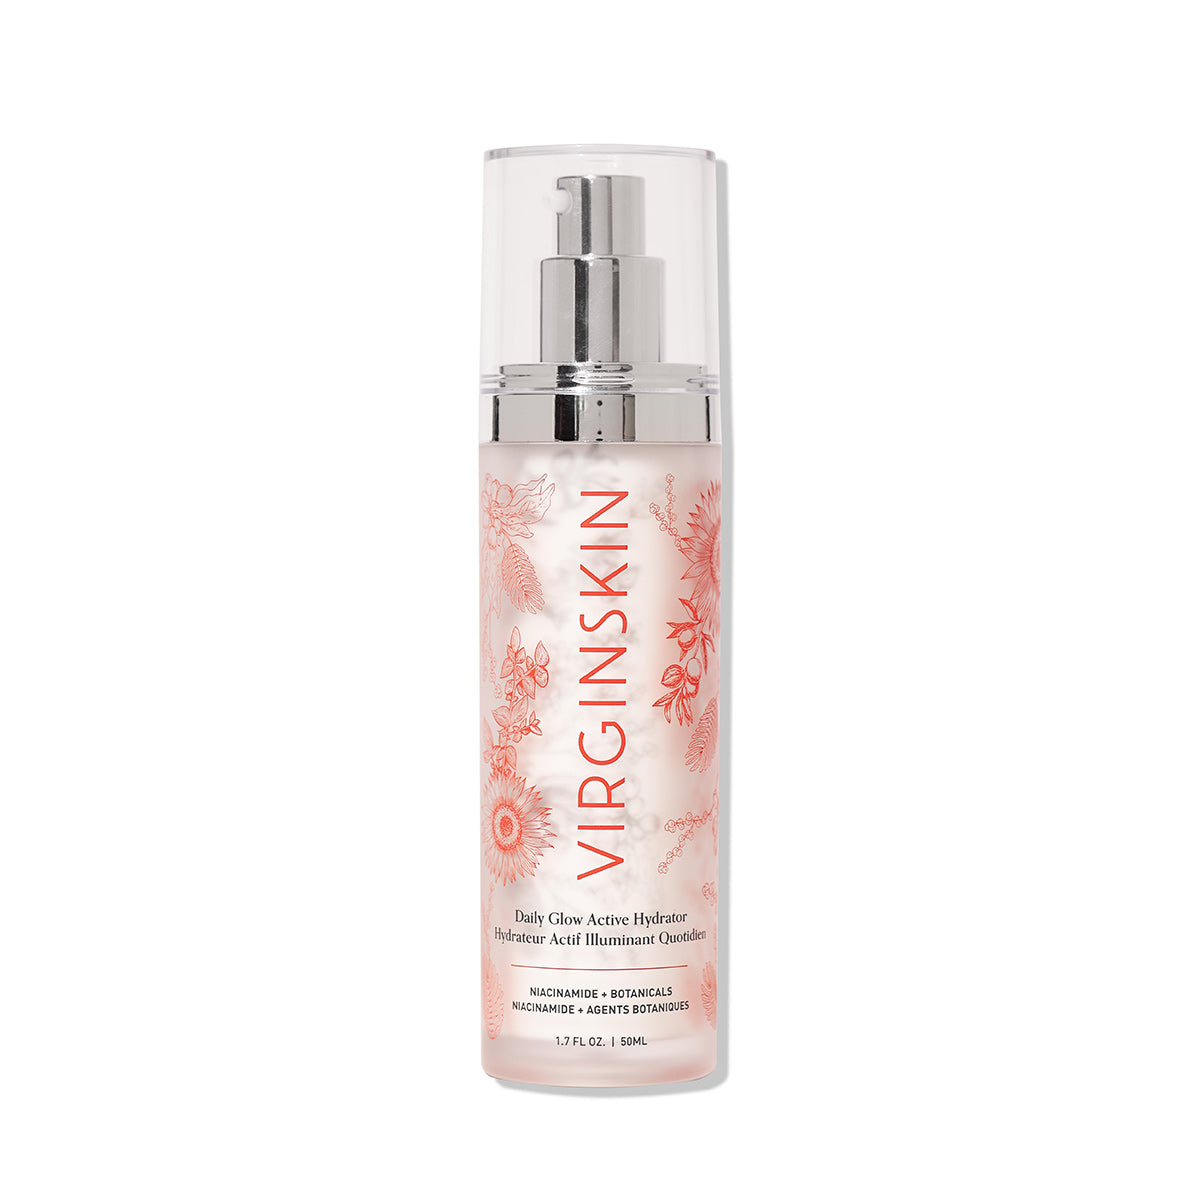 Daily Glow Active Hydrator